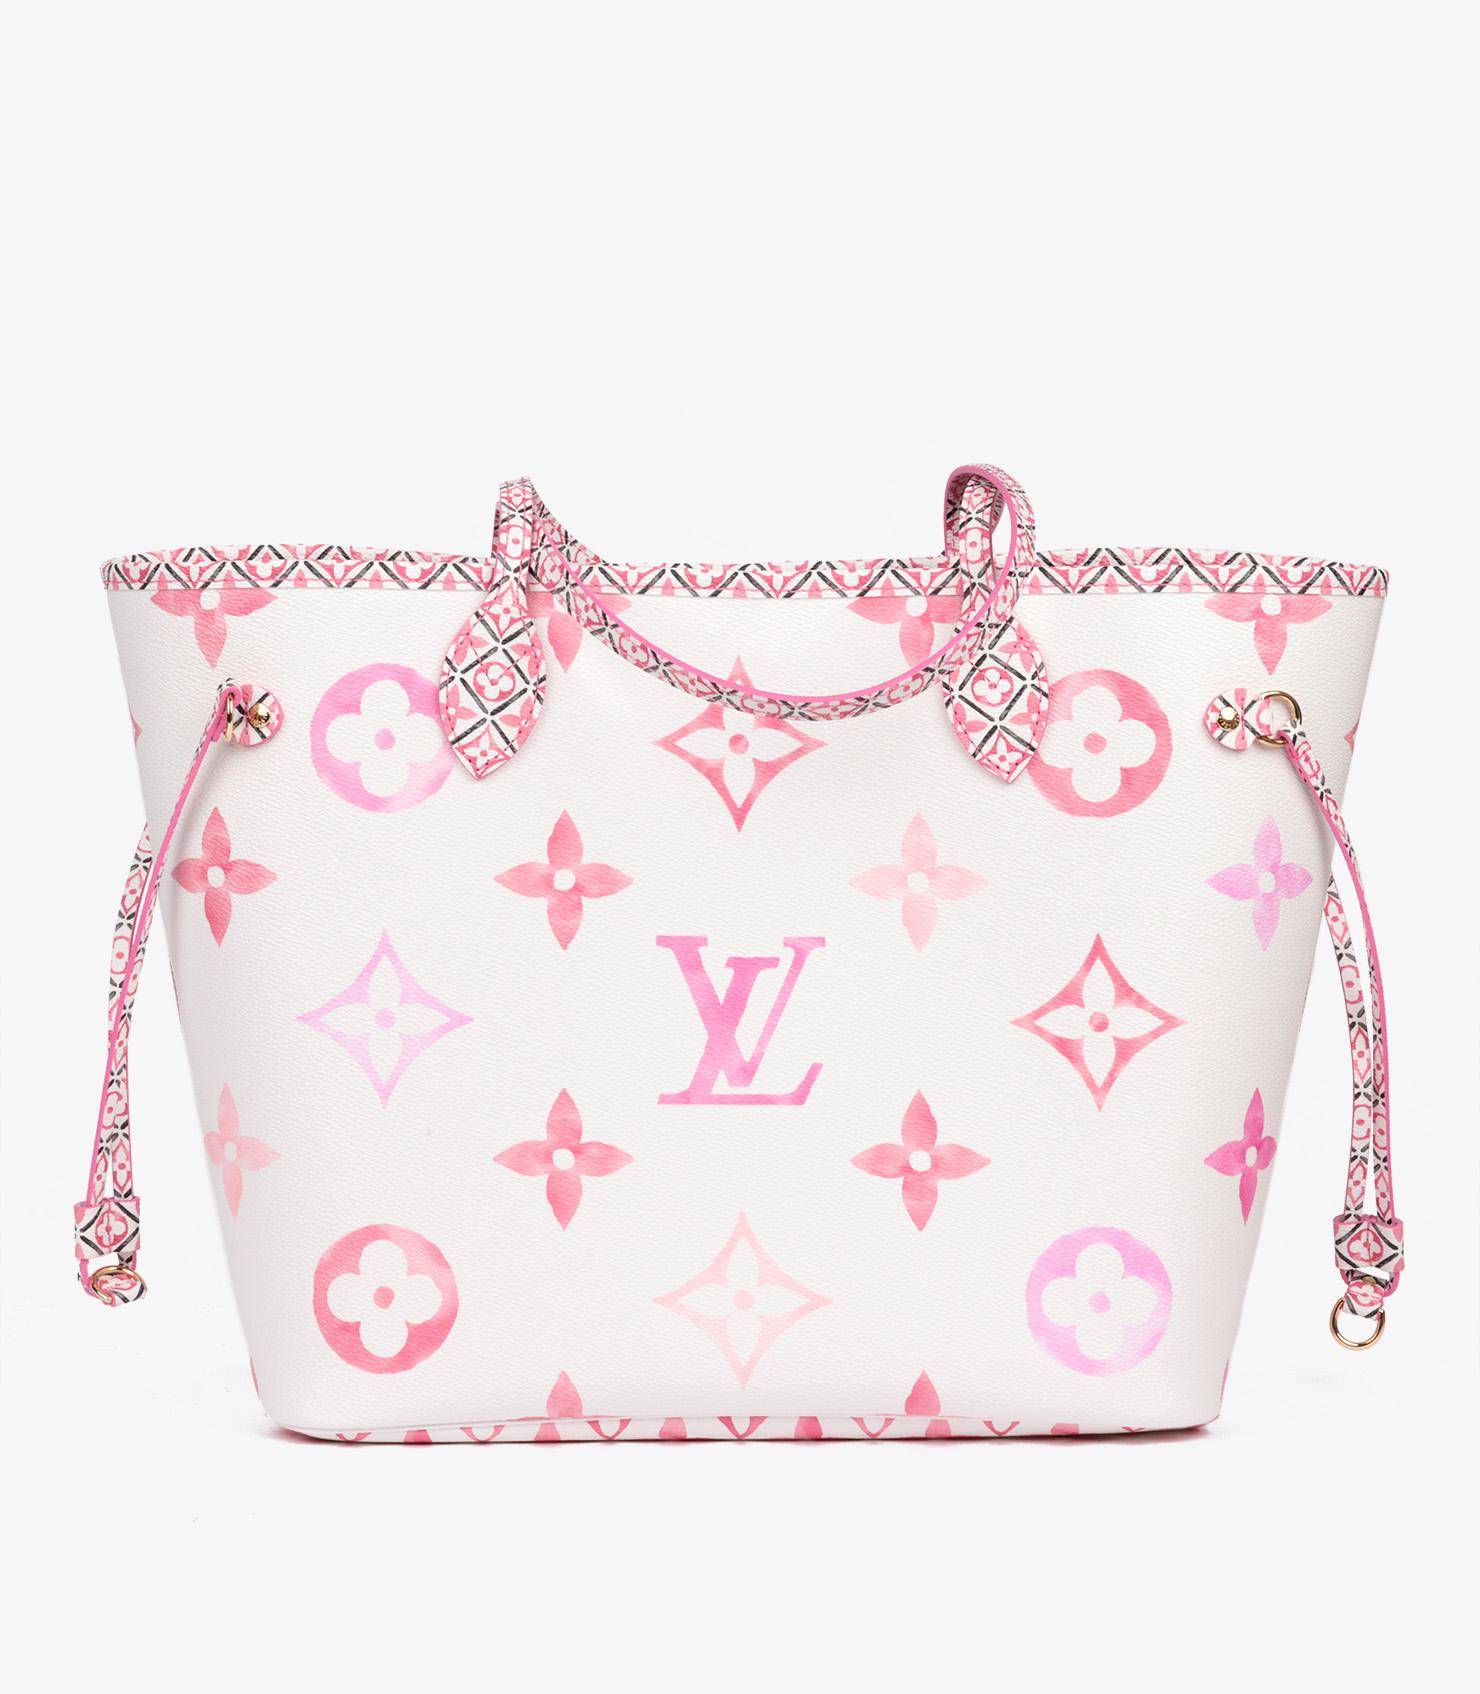 Women's Louis Vuitton White & Pink Monogram Canvas By The Pool Neverfull MM